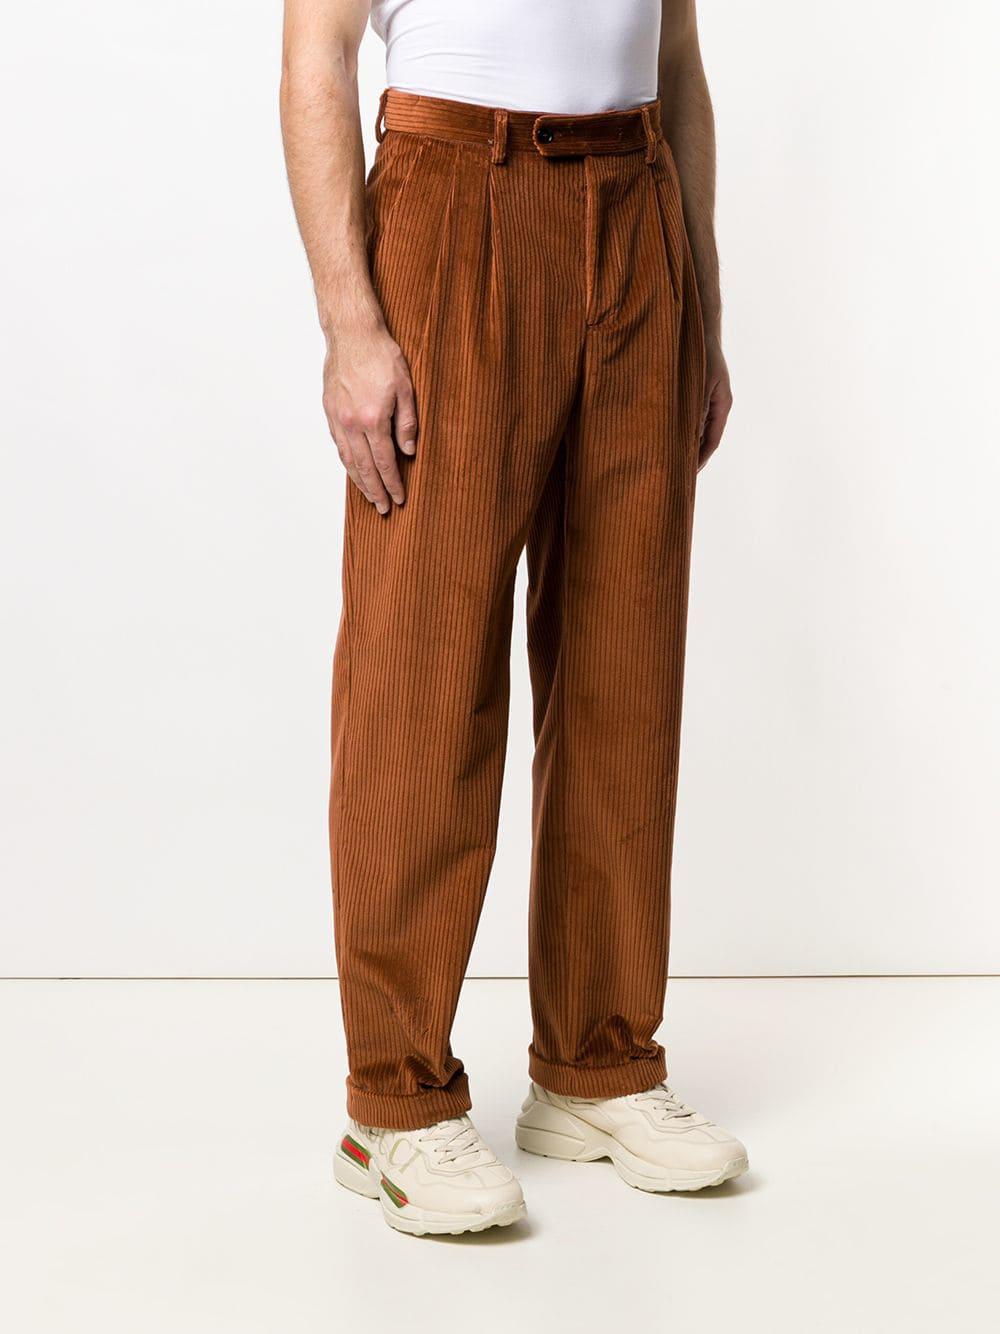 MSGM High-waisted Corduroy Trousers in Brown for Men - Lyst